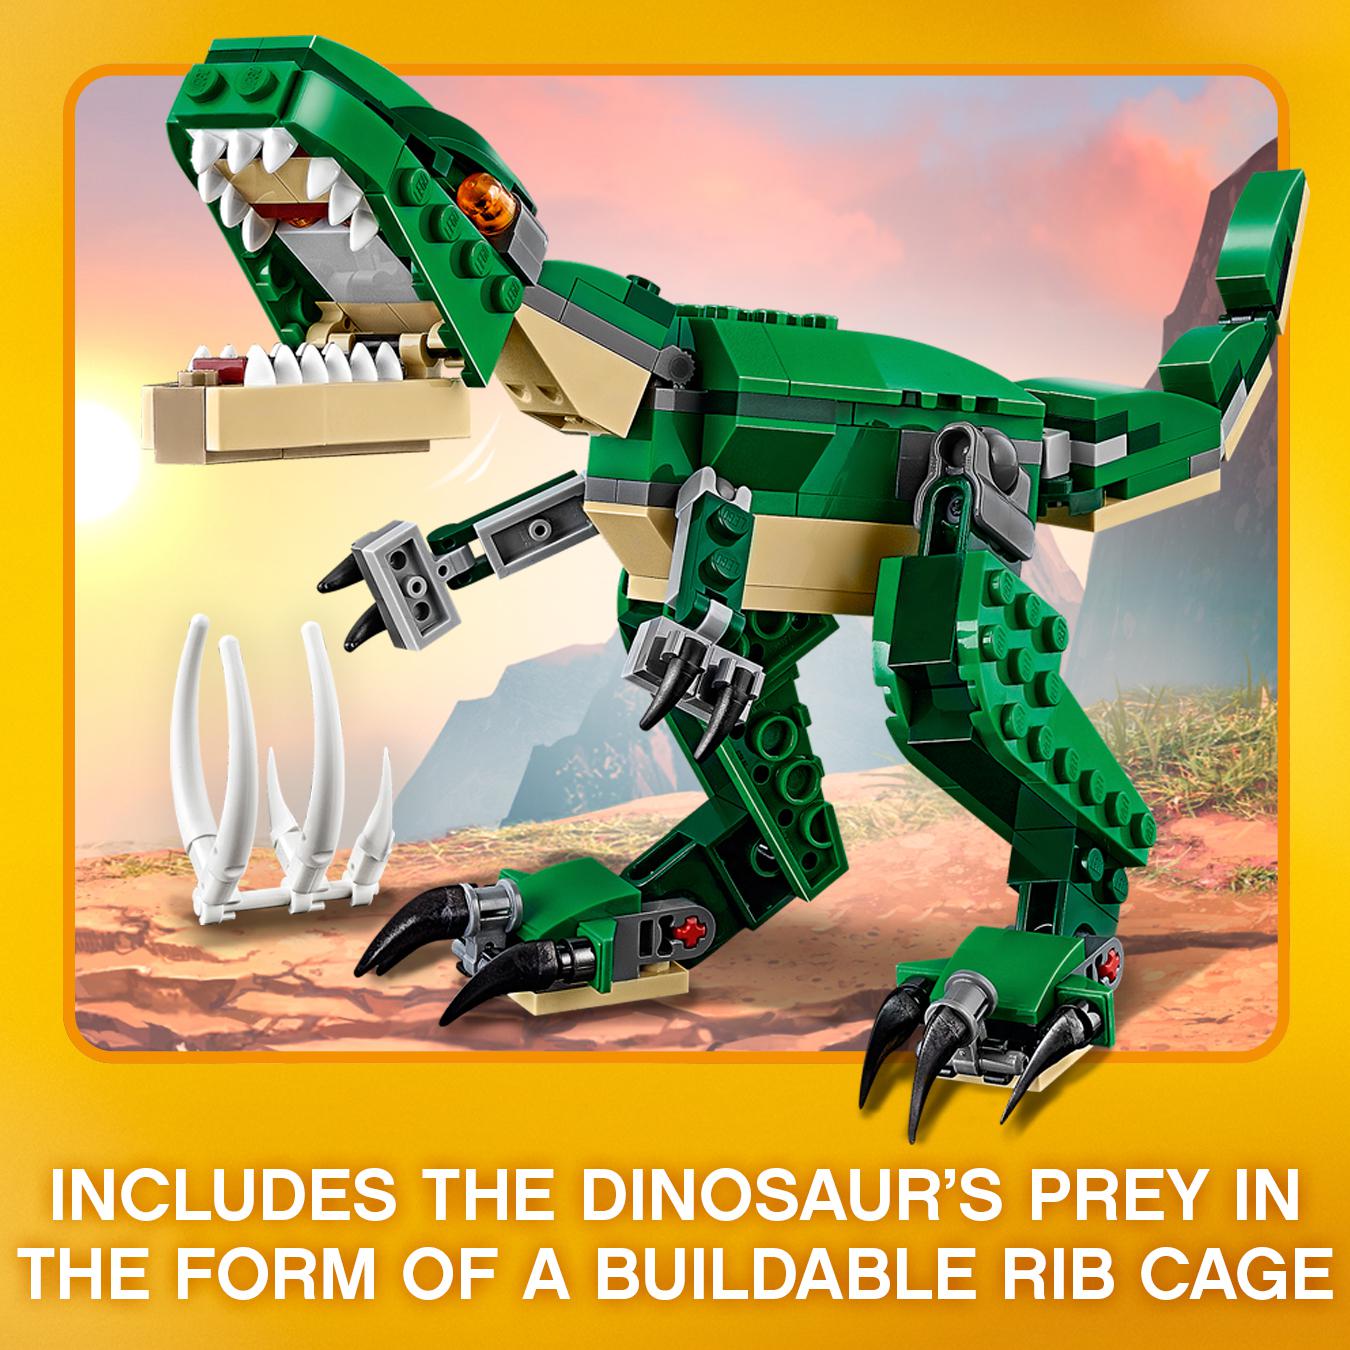 LEGO® Creator 3in1 Mighty Dinosaurs Model Set 31058 Default Title